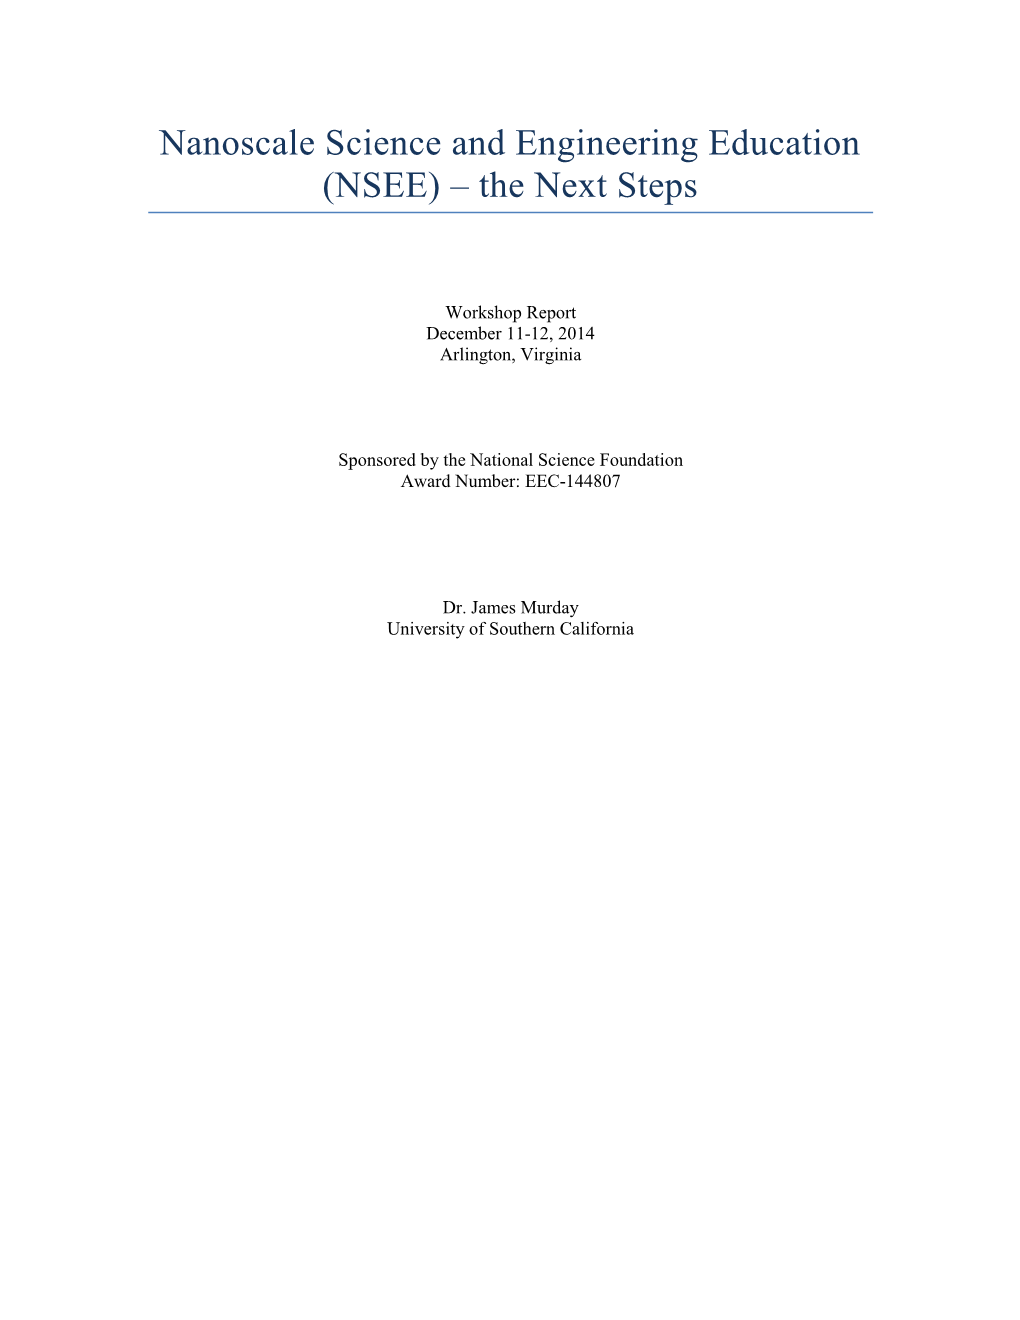 Nanoscale Science and Engineering Education (NSEE) – the Next Steps